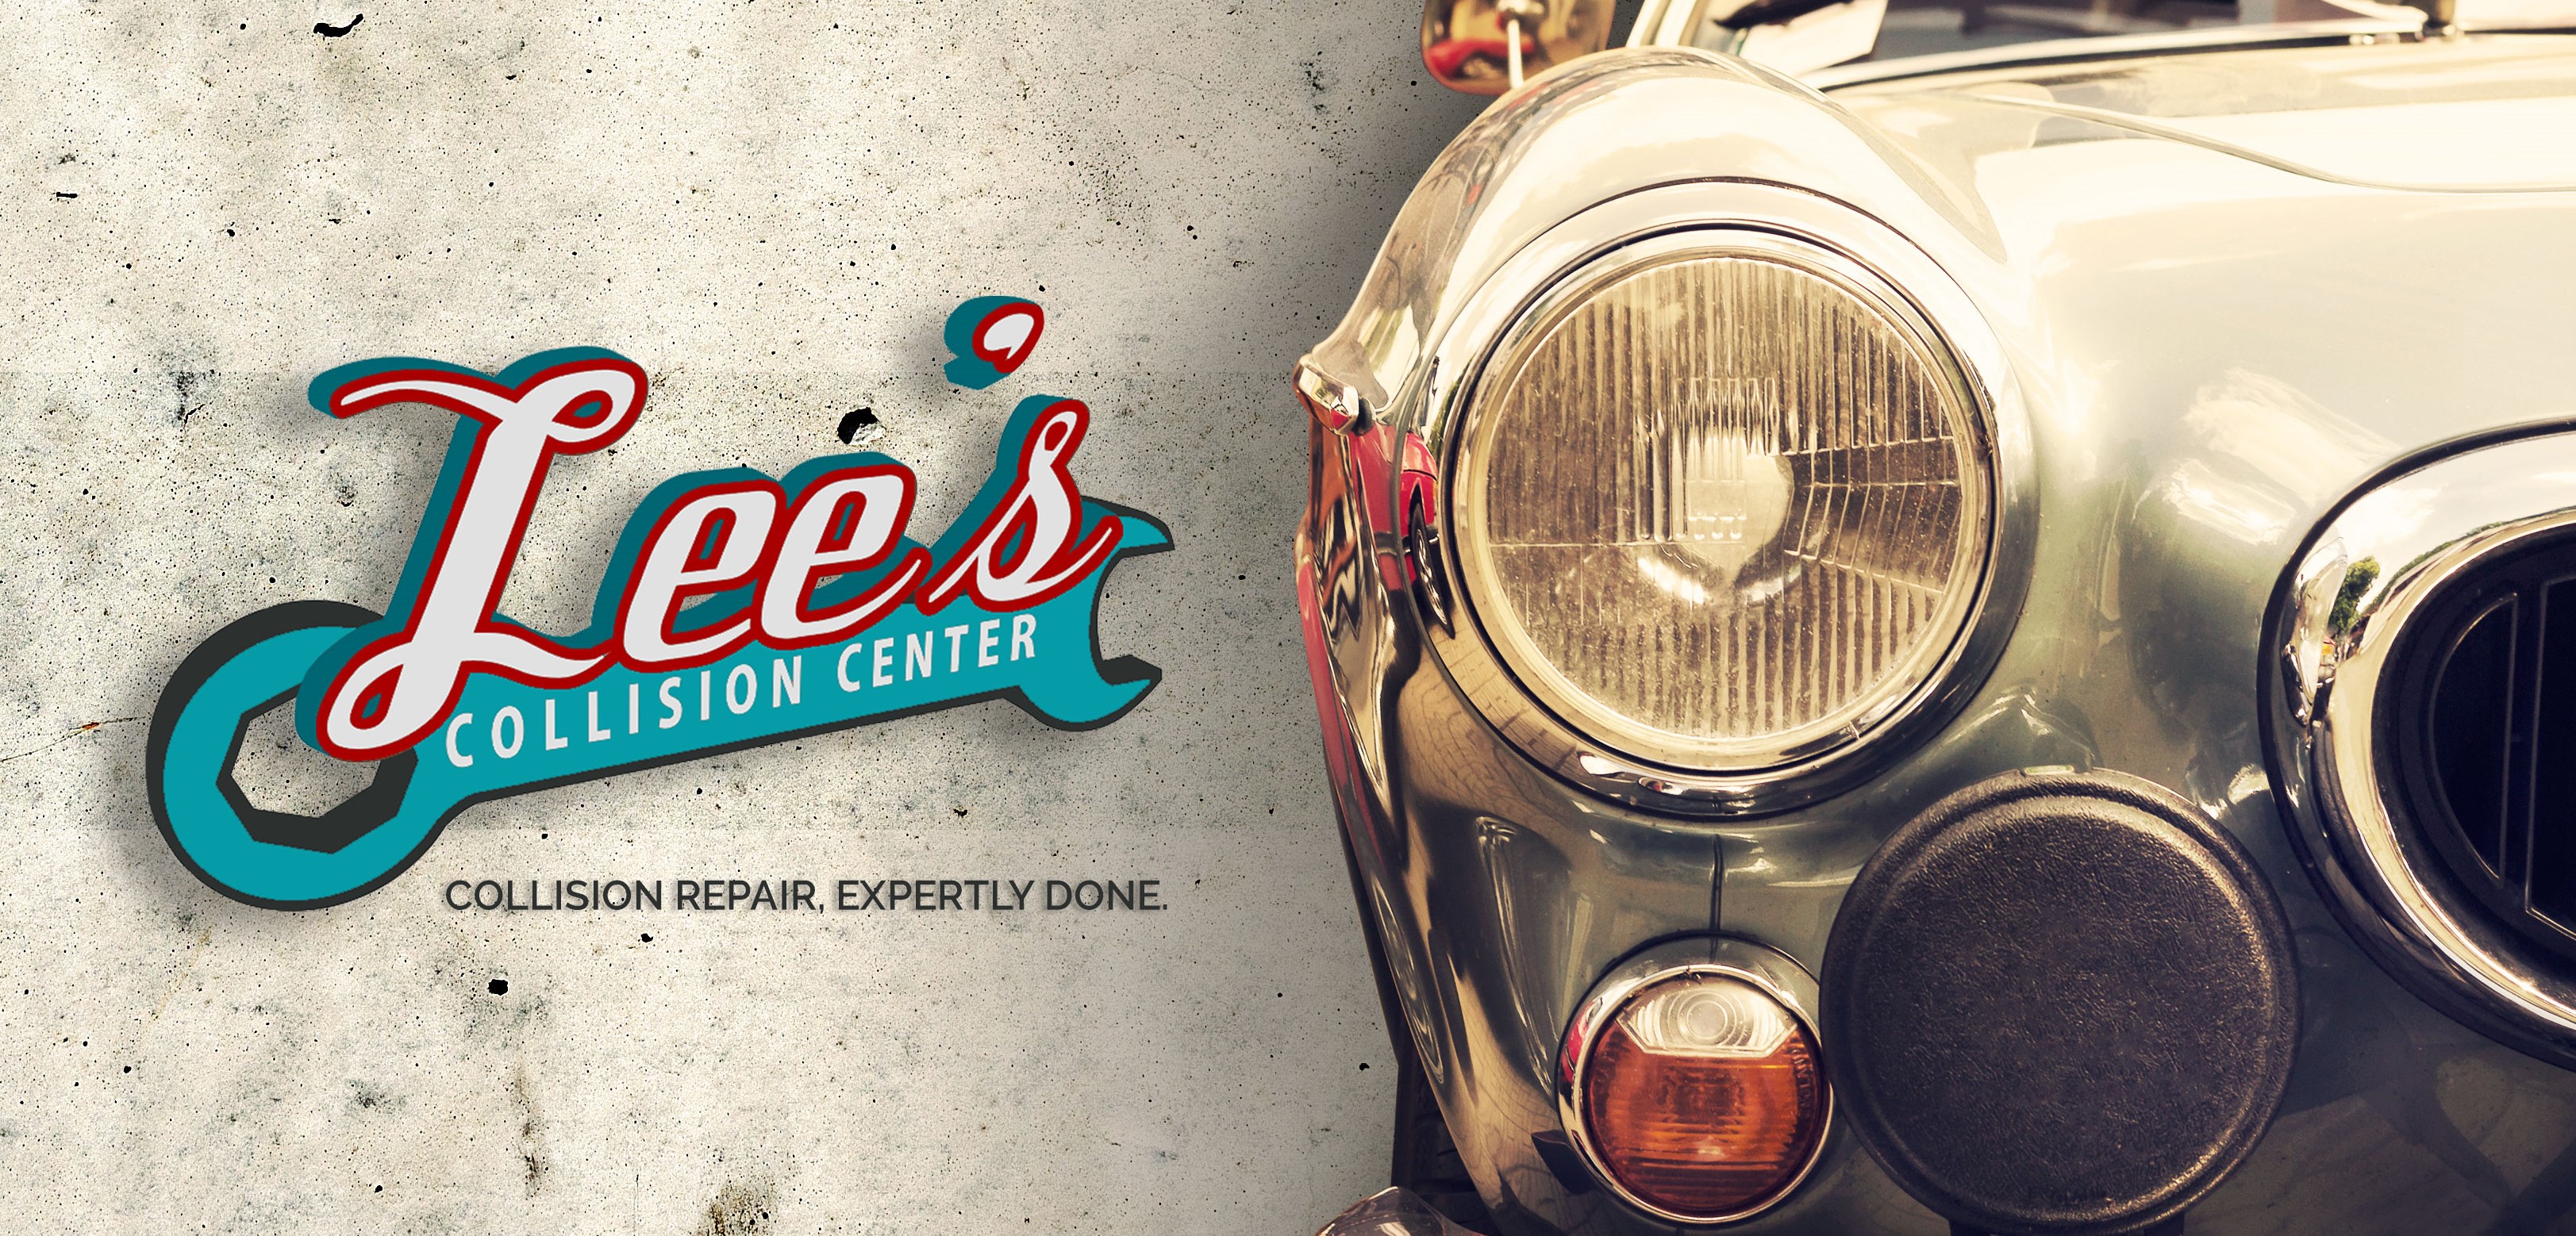 Lee's Collision Center | Collision Repair, Expertly Done